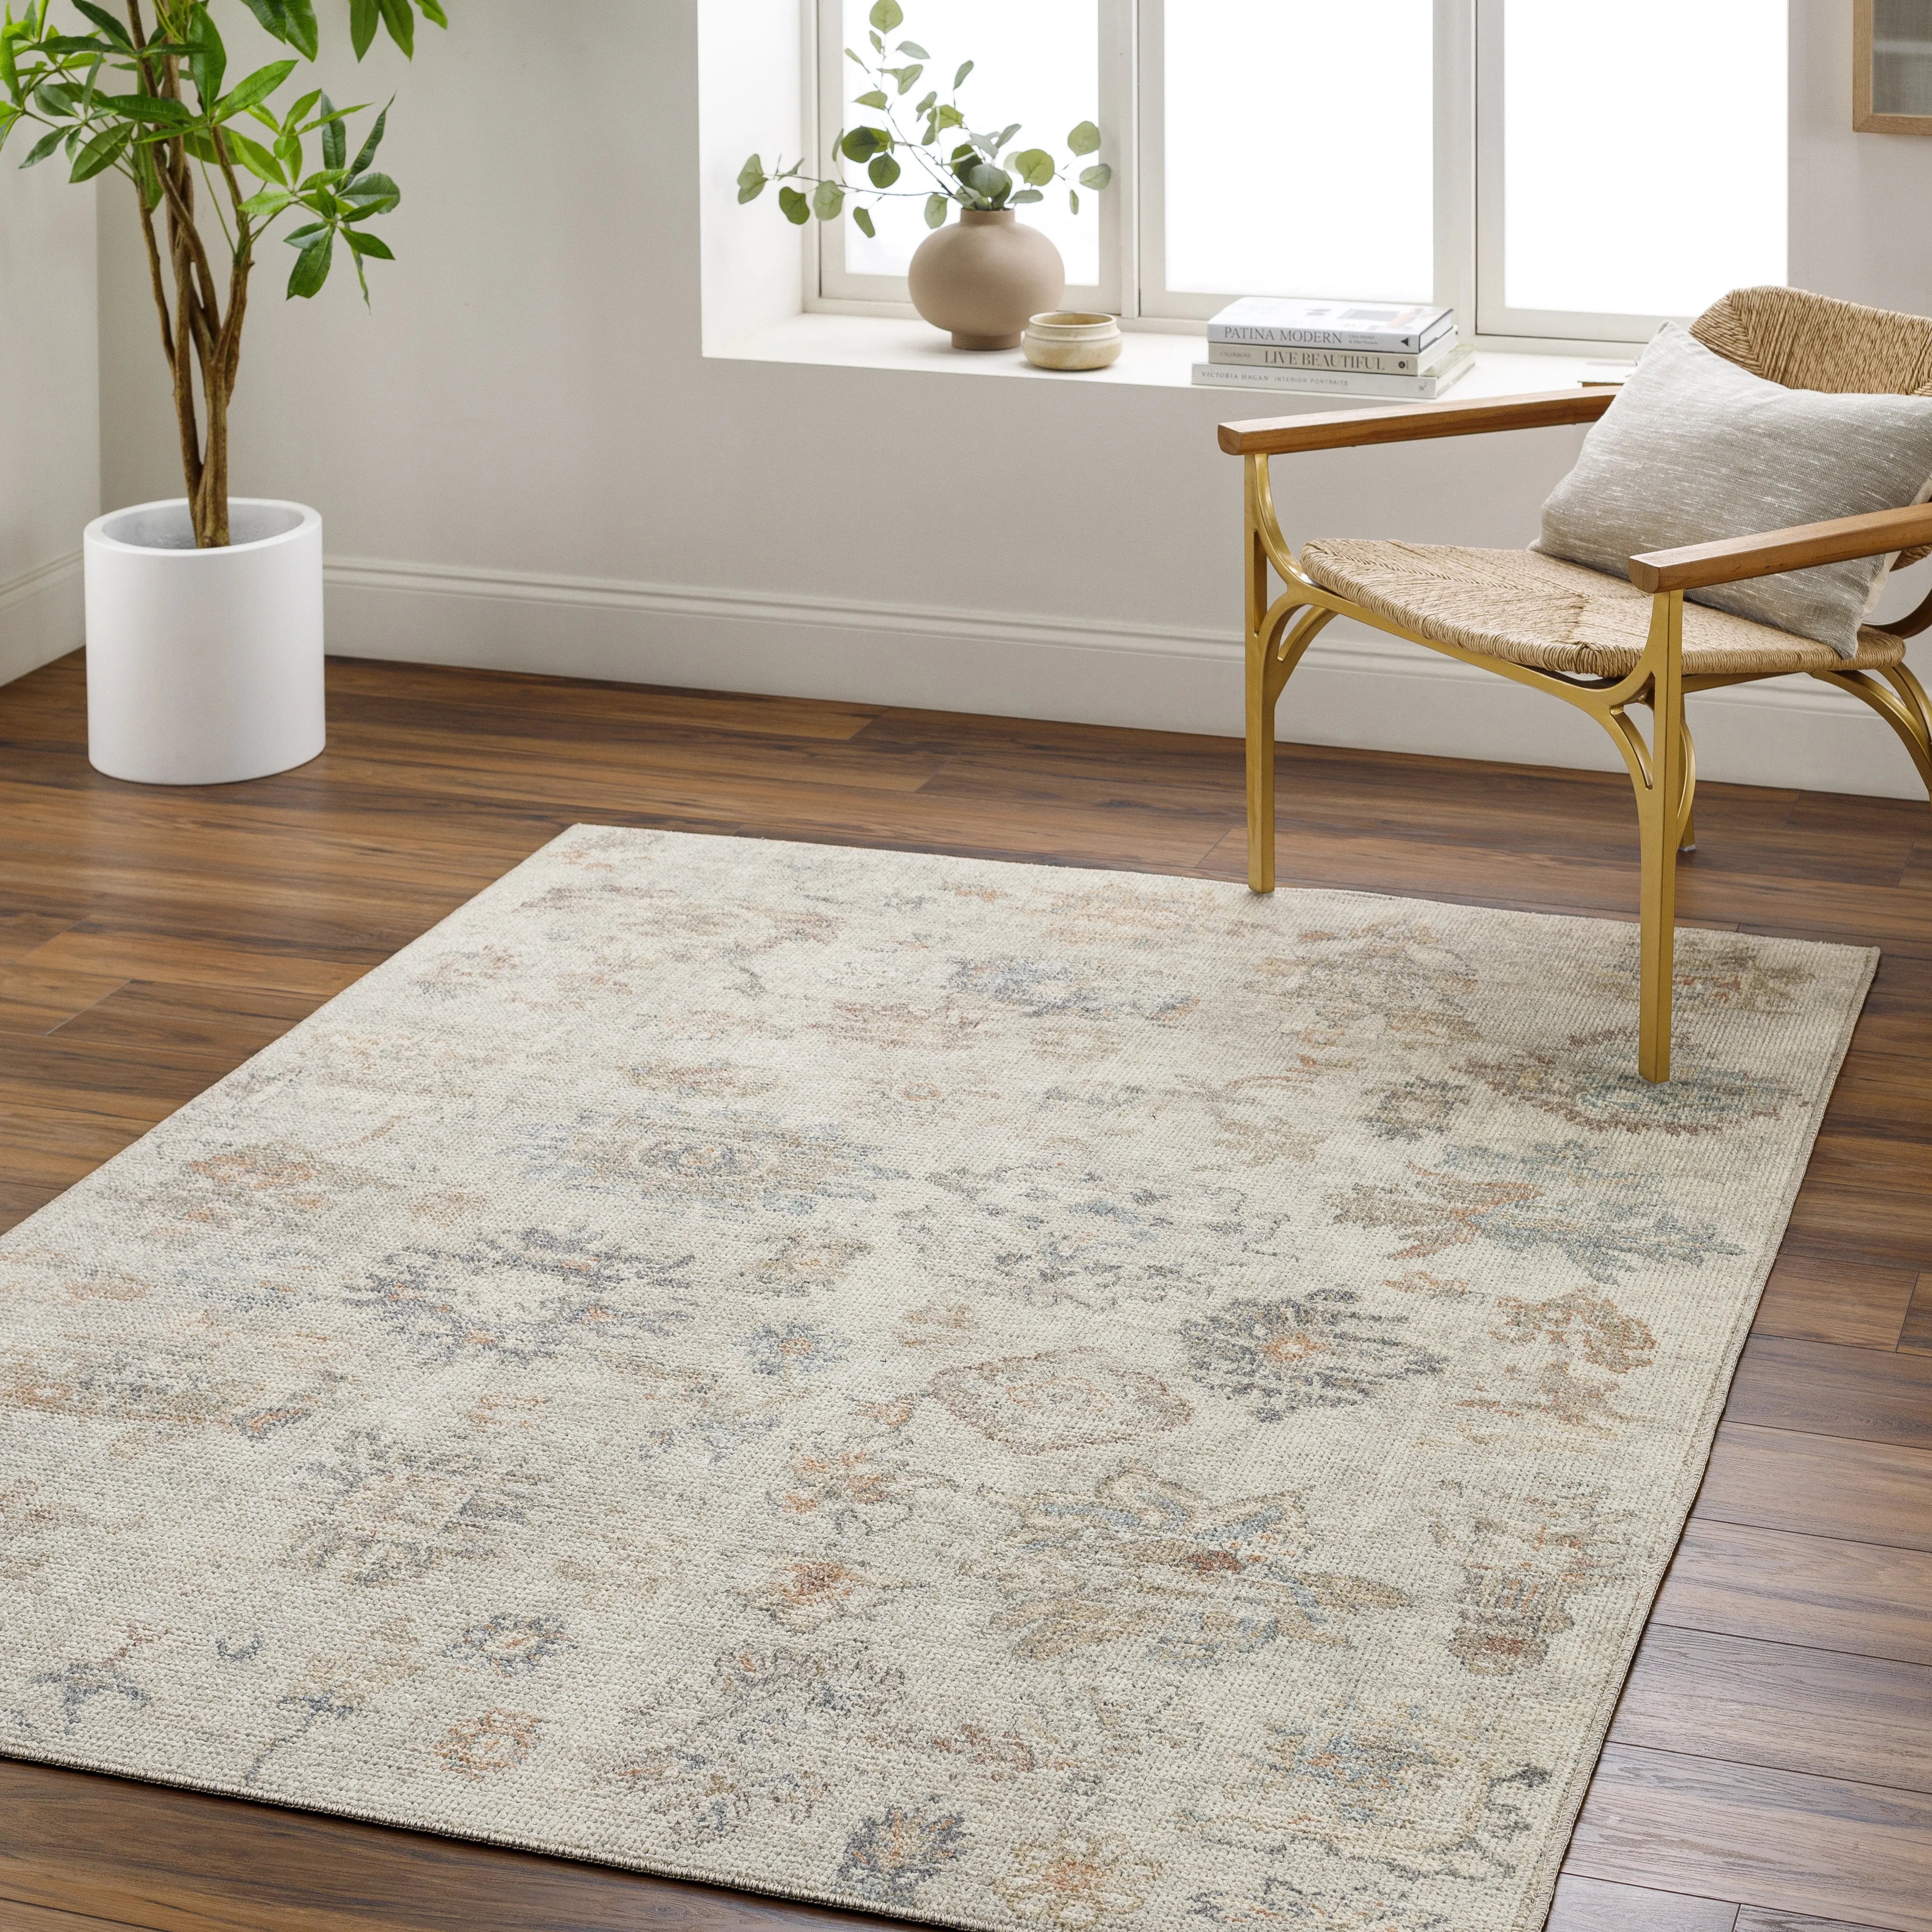 PNW Home x Surya available at Amethyst Home shipping to Australia, UK, and Canada. Organic modern design with easy to clean rugs for a family home in  the Houston metro area.